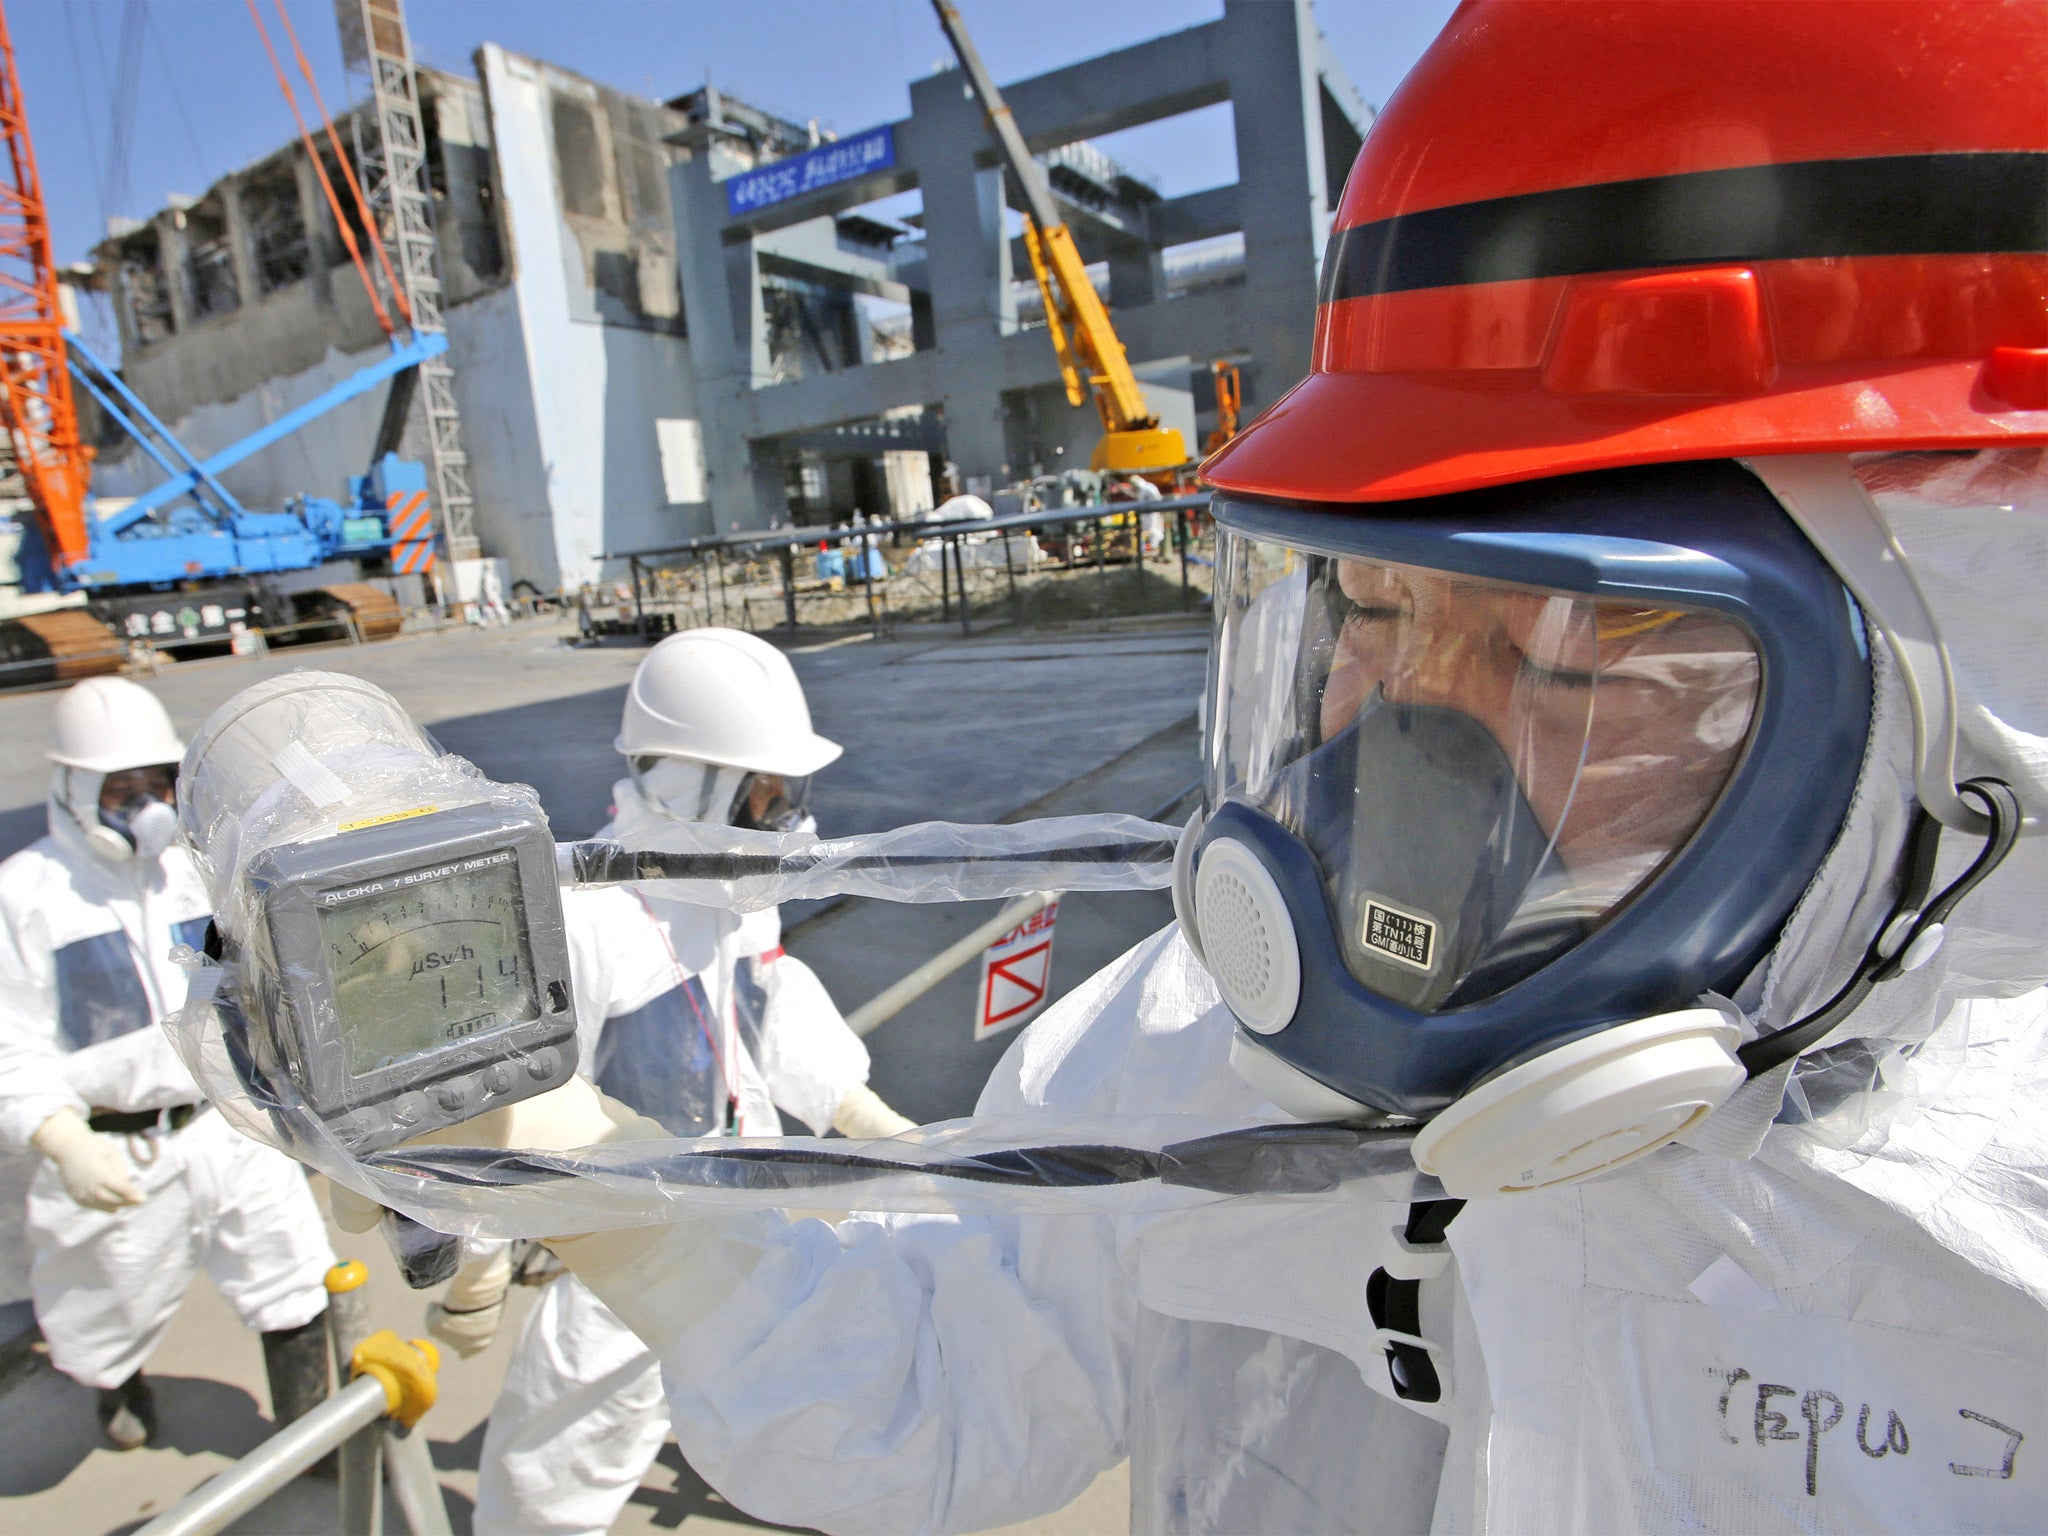 A radiation monitor indicates 114 microsieverts per hour near the building housing Fukushima’s reactor unit four